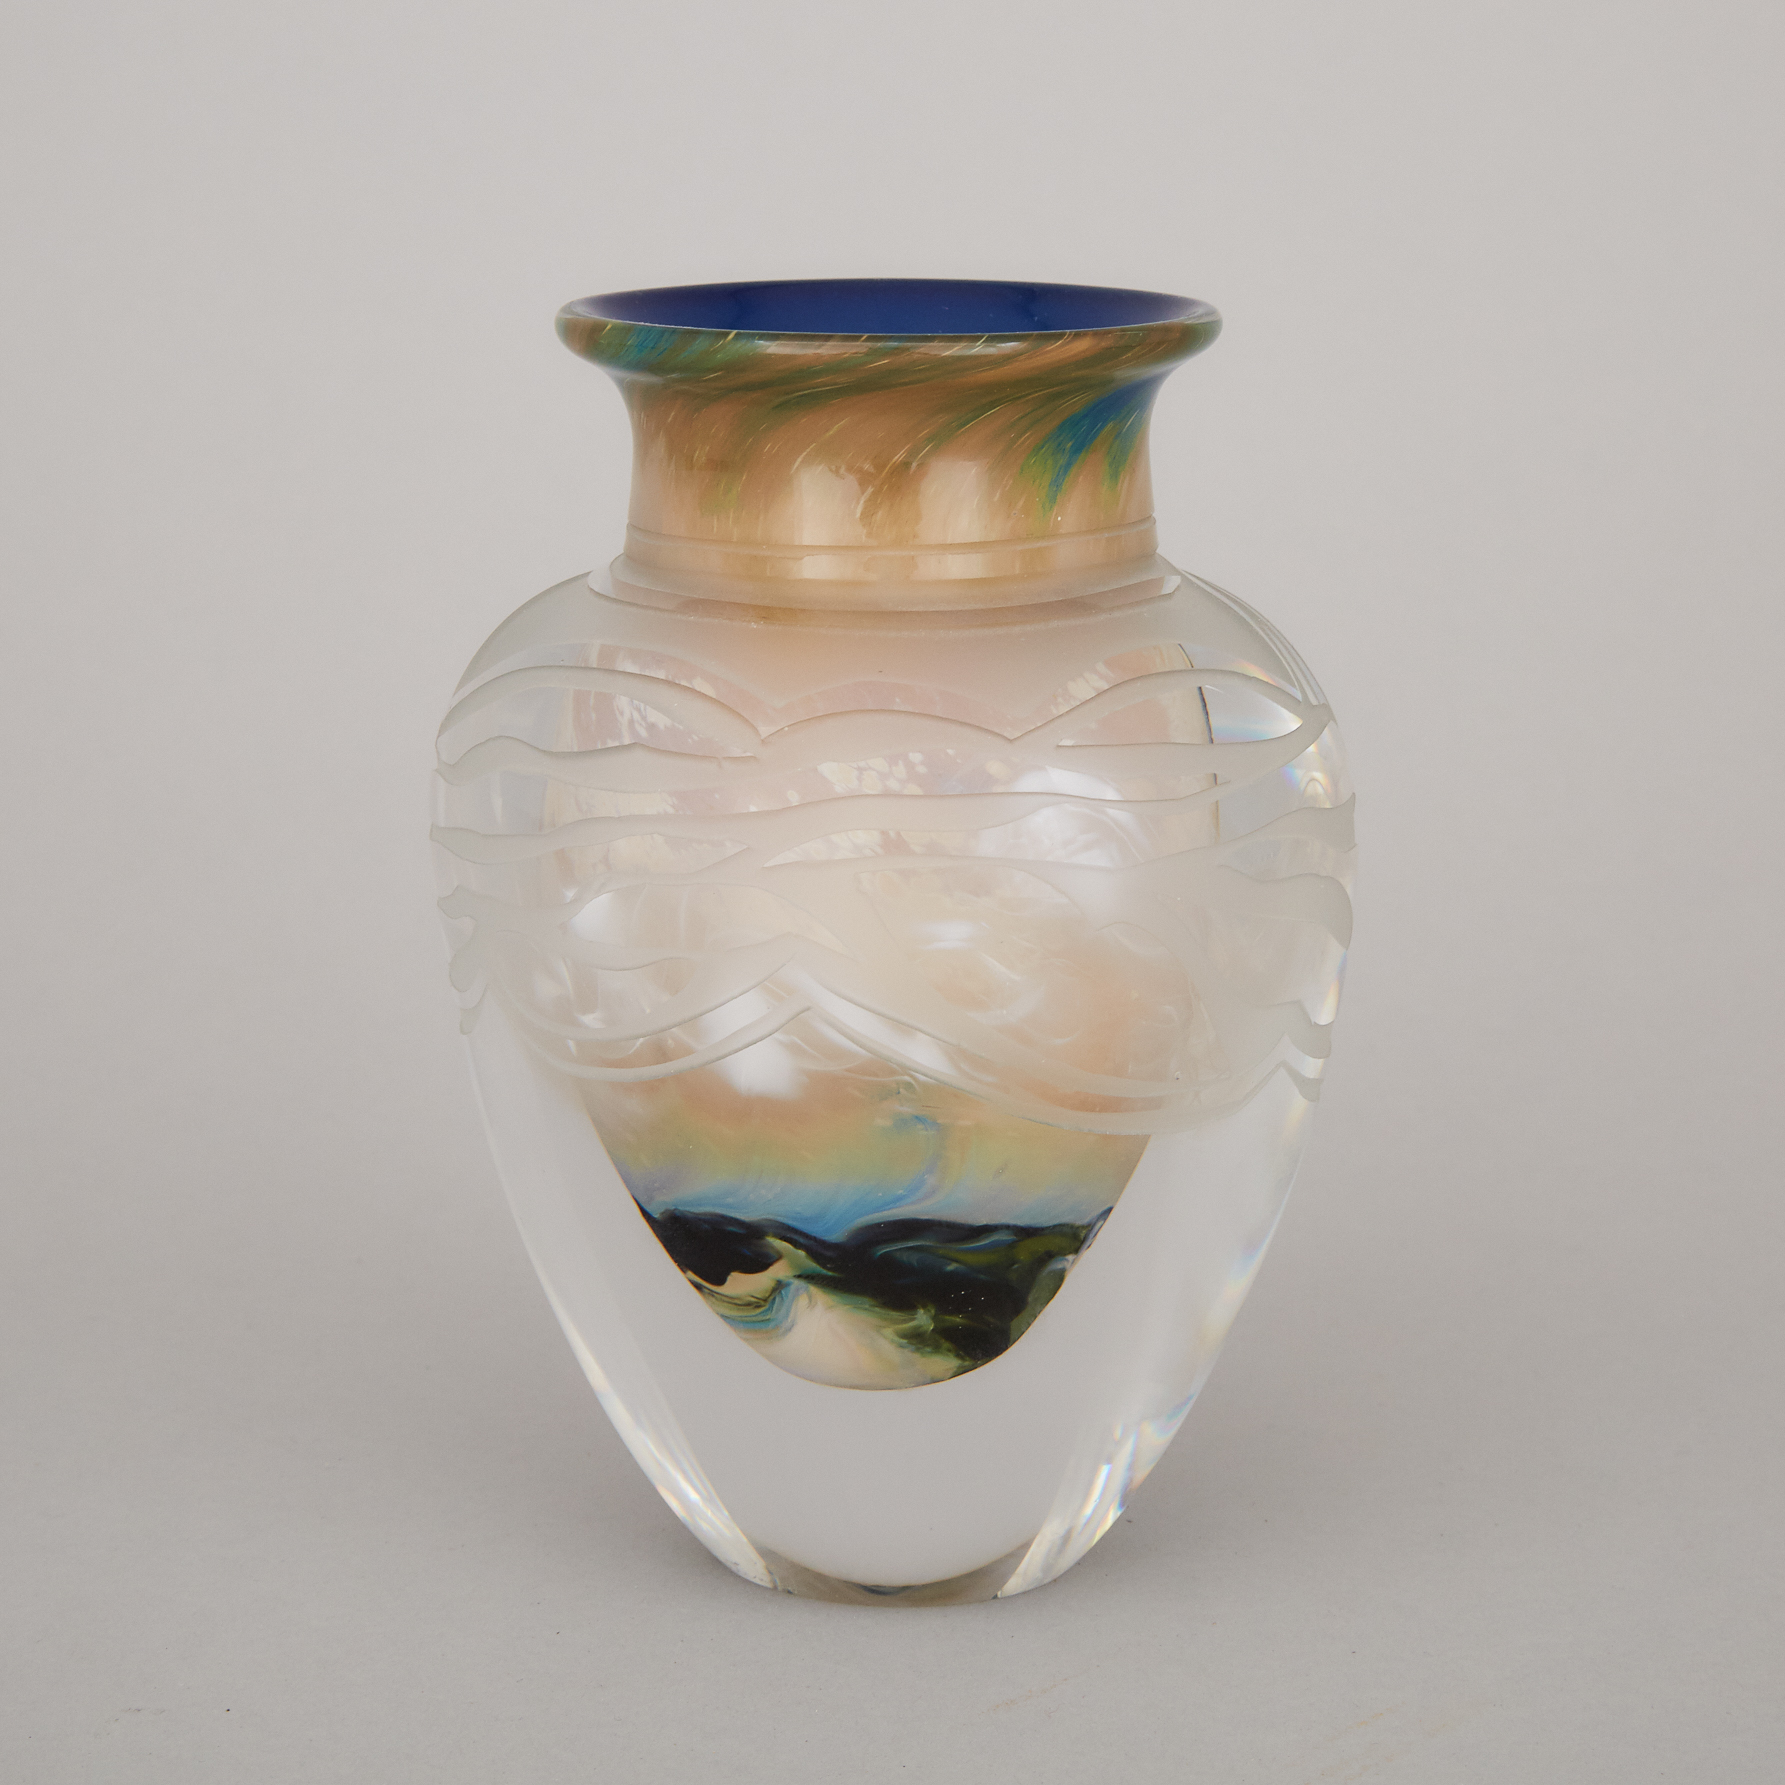 Toan Klein (American/Canadian, b.1949), Internally Decorated and Etched Glass Vase, 2010